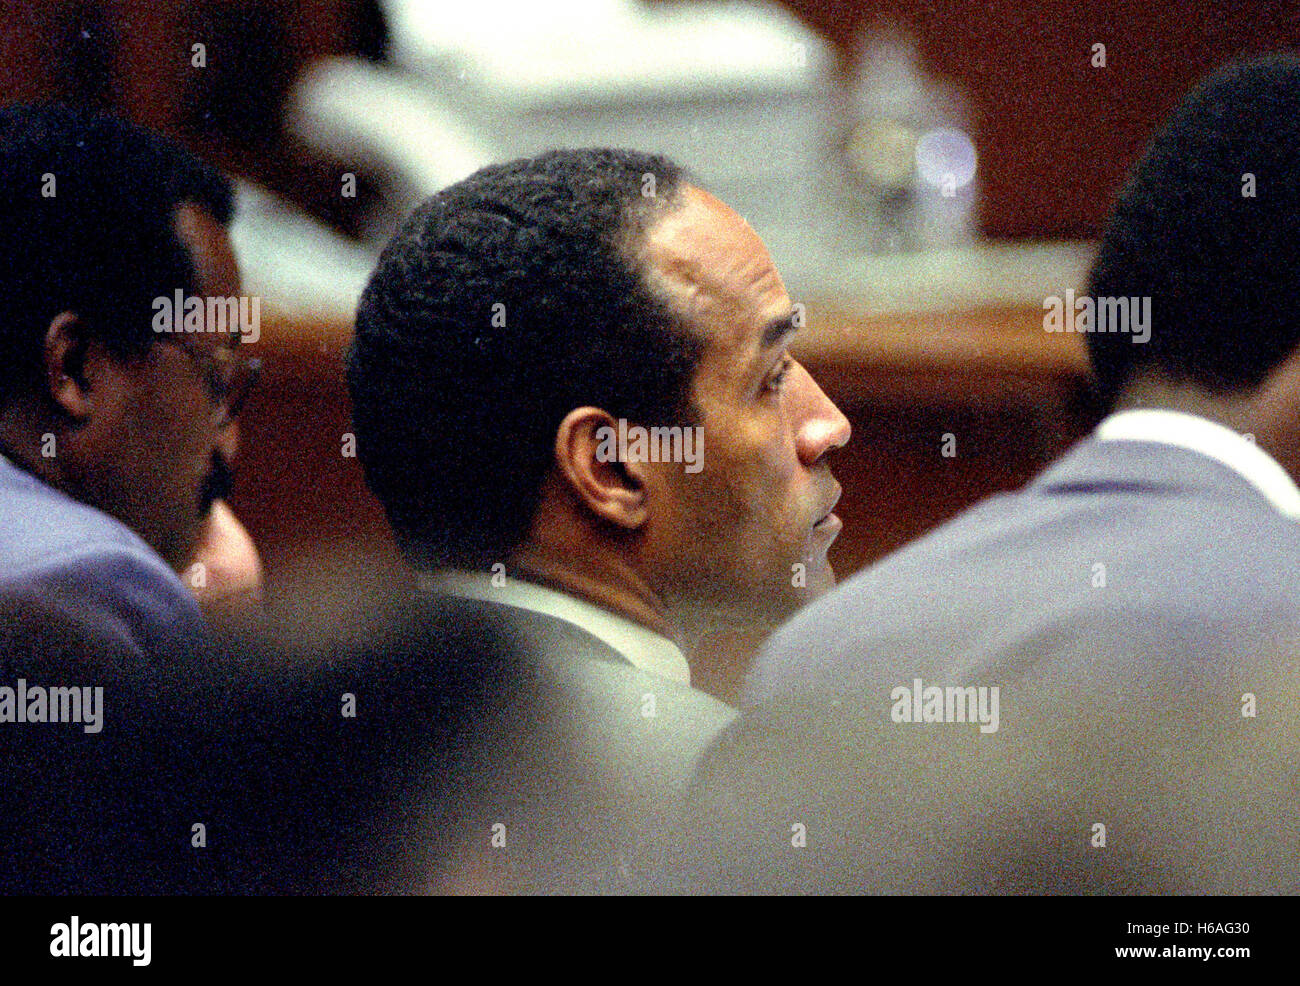 Former NFL star running back O.J. Simpson looks on during his trial of for the murder of his former wife, Nicole Brown Simpson and a friend of hers, restaurant waiter, Ron Goldman in Los Angeles County Superior Court in Los Angeles, California on July 13, 1995. Credit: Steve Grayson/Pool via CNP - NO WIRE SERVICE - Stock Photo